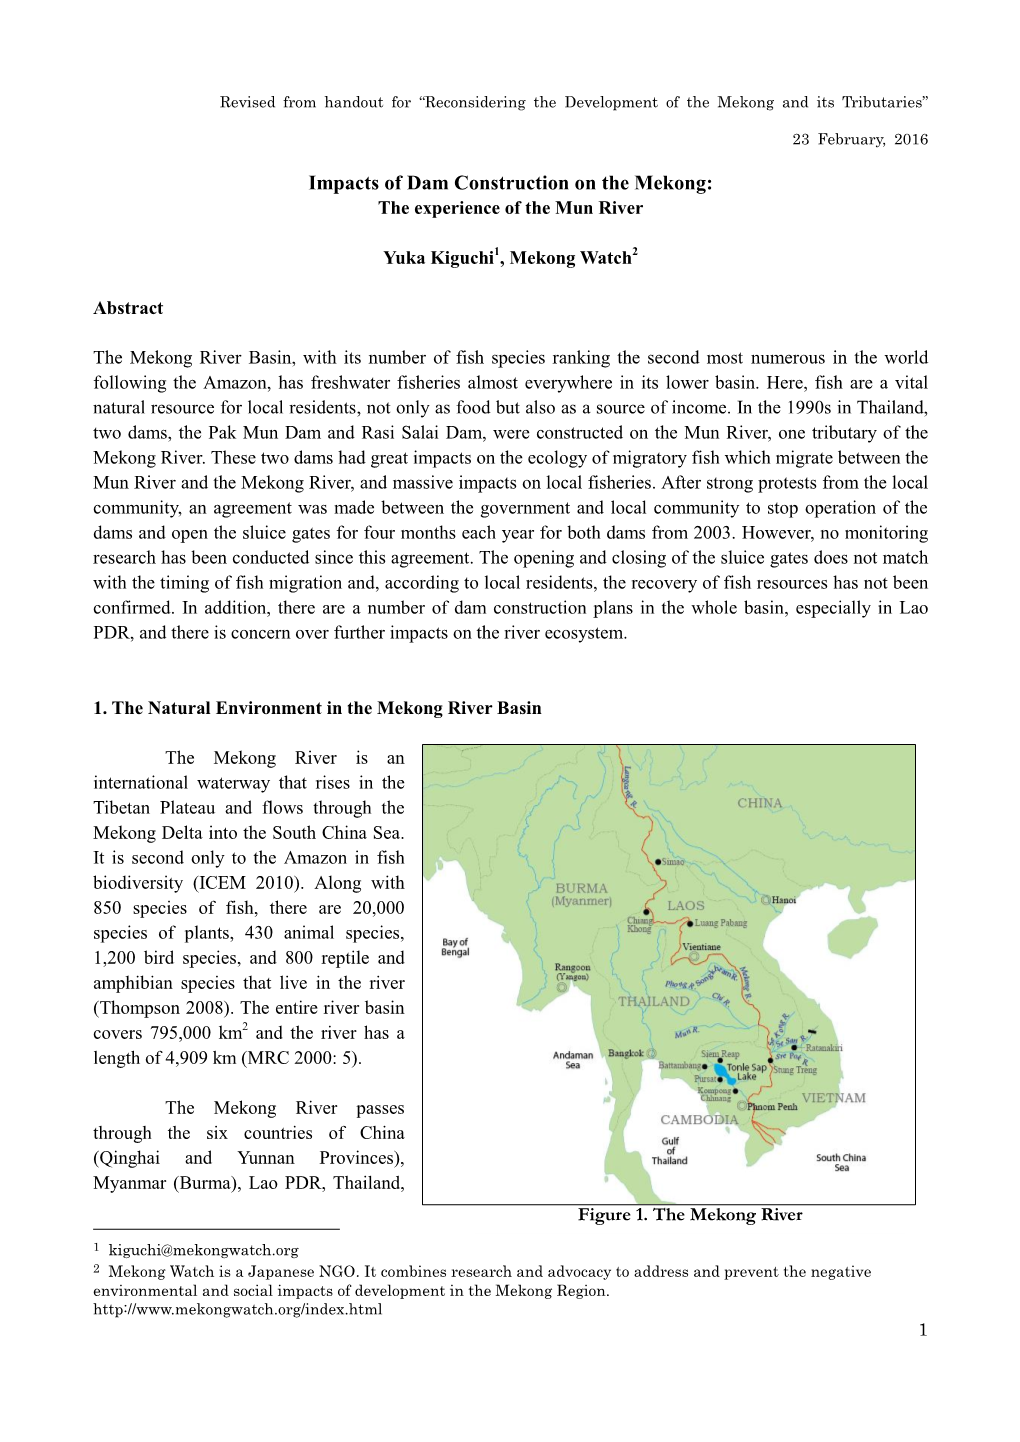 Impacts of Dam Construction on the Mekong: the Experience of the Mun River